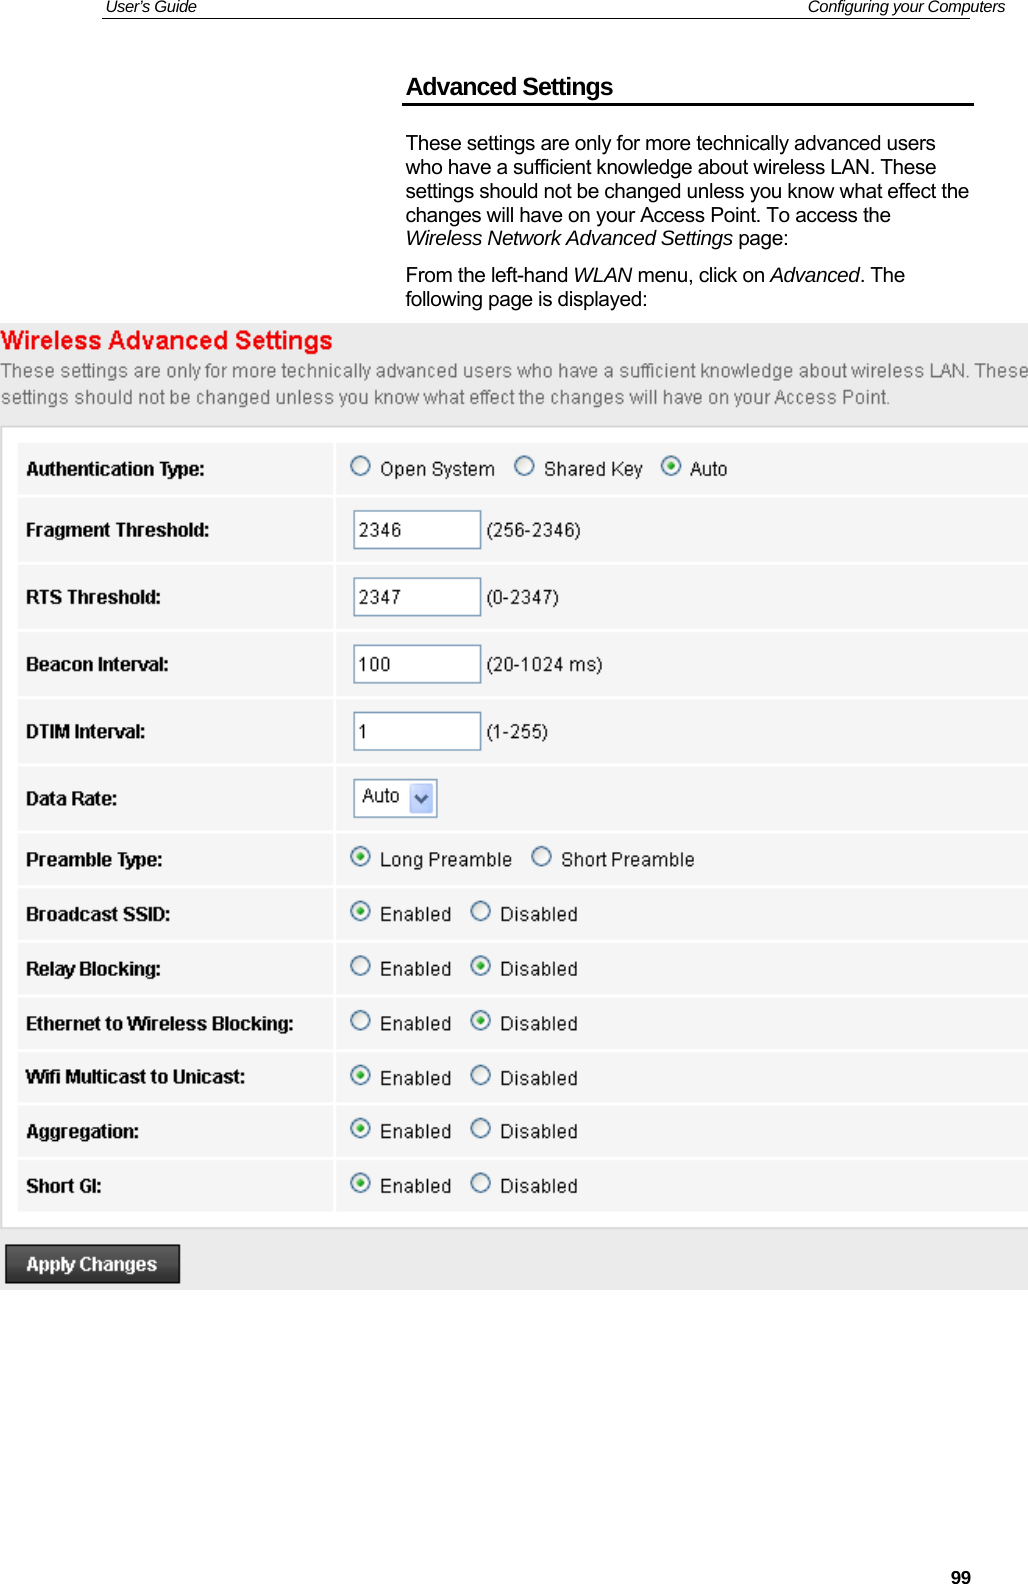 User’s Guide   Configuring your Computers  99Advanced Settings These settings are only for more technically advanced users who have a sufficient knowledge about wireless LAN. These settings should not be changed unless you know what effect the changes will have on your Access Point. To access the Wireless Network Advanced Settings page: From the left-hand WLAN menu, click on Advanced. The following page is displayed:        